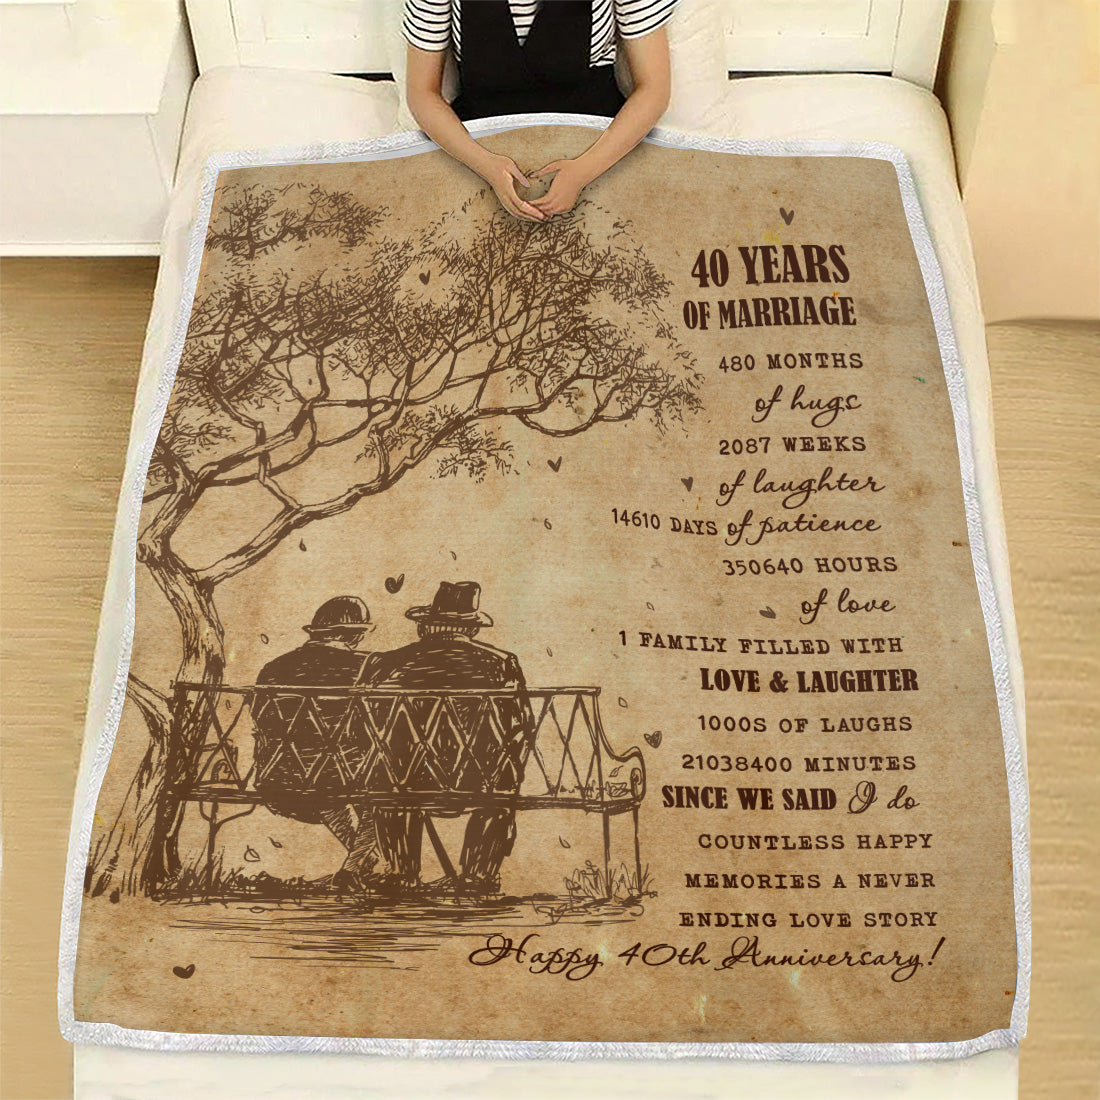 40th Anniversary Wedding Gift For Couple- 40 Years of Marriage Gift for Husband Wife Mom Dad Parents- Velveteen Plush Blanket- Ruby Marriage Anniversary Blanket For Her Him, Valentines Day Gift